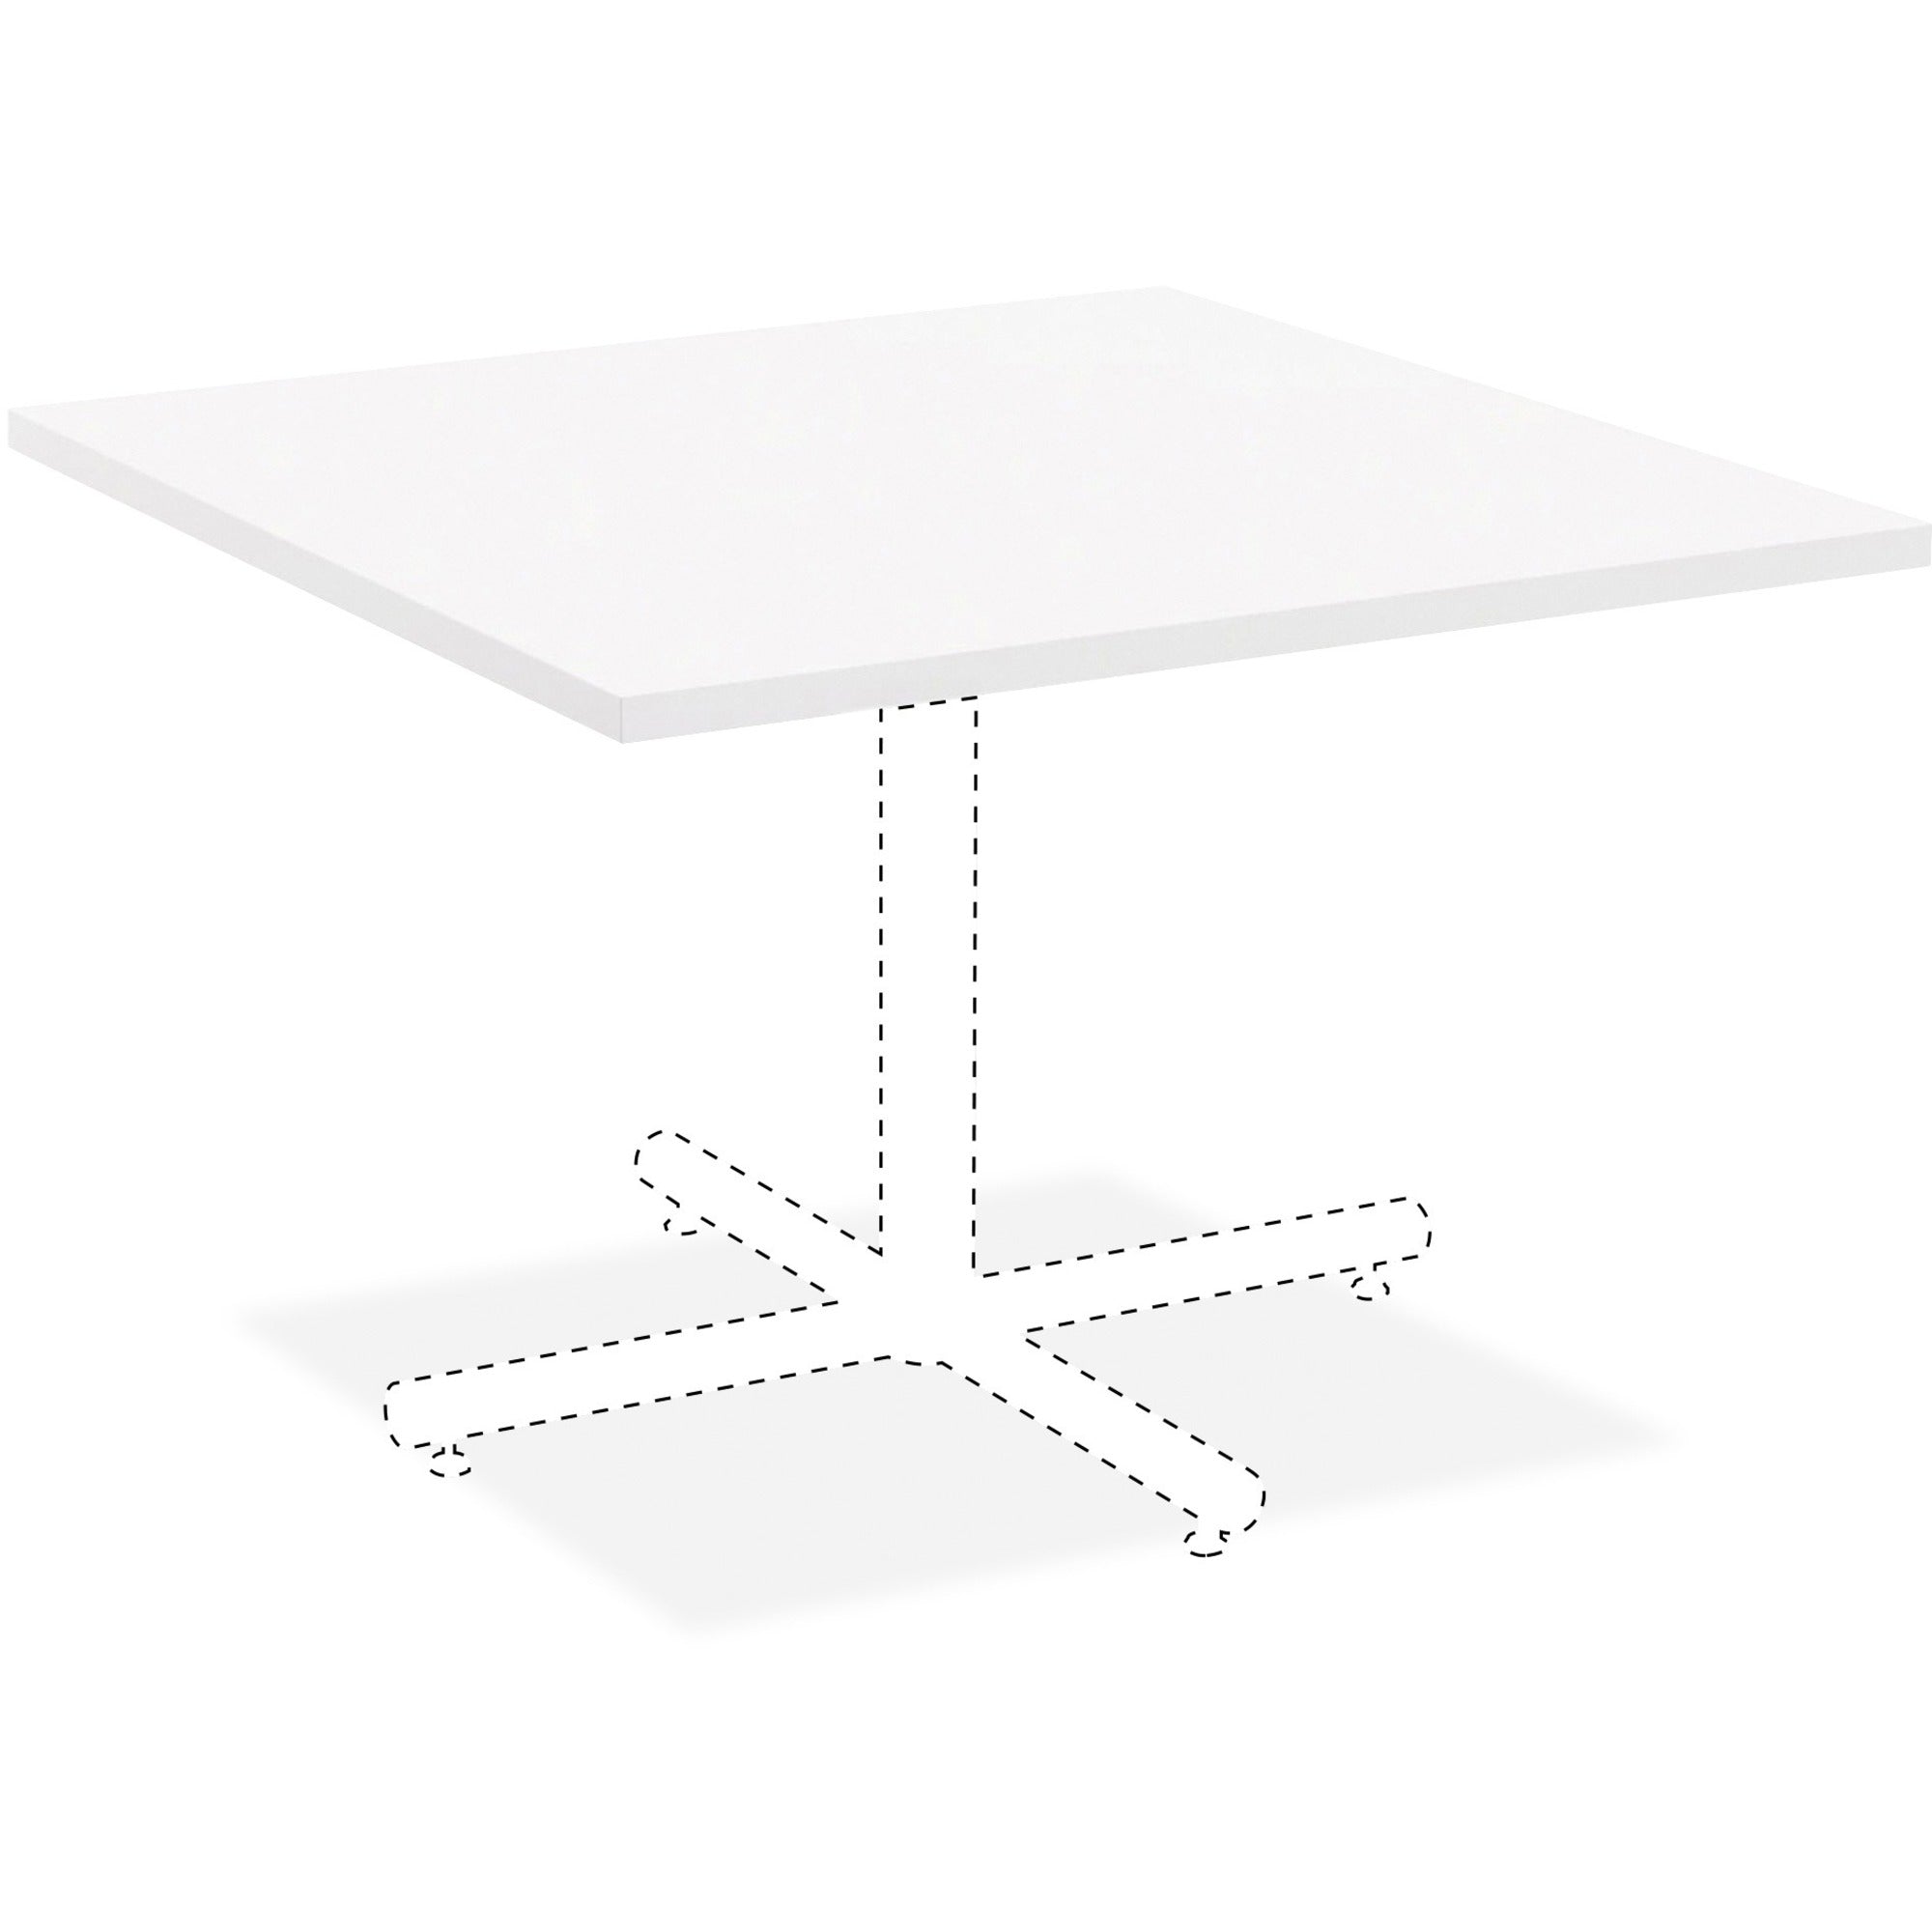 lorell-hospitality-collection-tabletop-for-table-tophigh-pressure-laminate-hpl-square-white-top-x-36-table-top-width-x-36-table-top-depth-x-1-table-top-thickness-assembly-required-1-each_llr99858 - 1